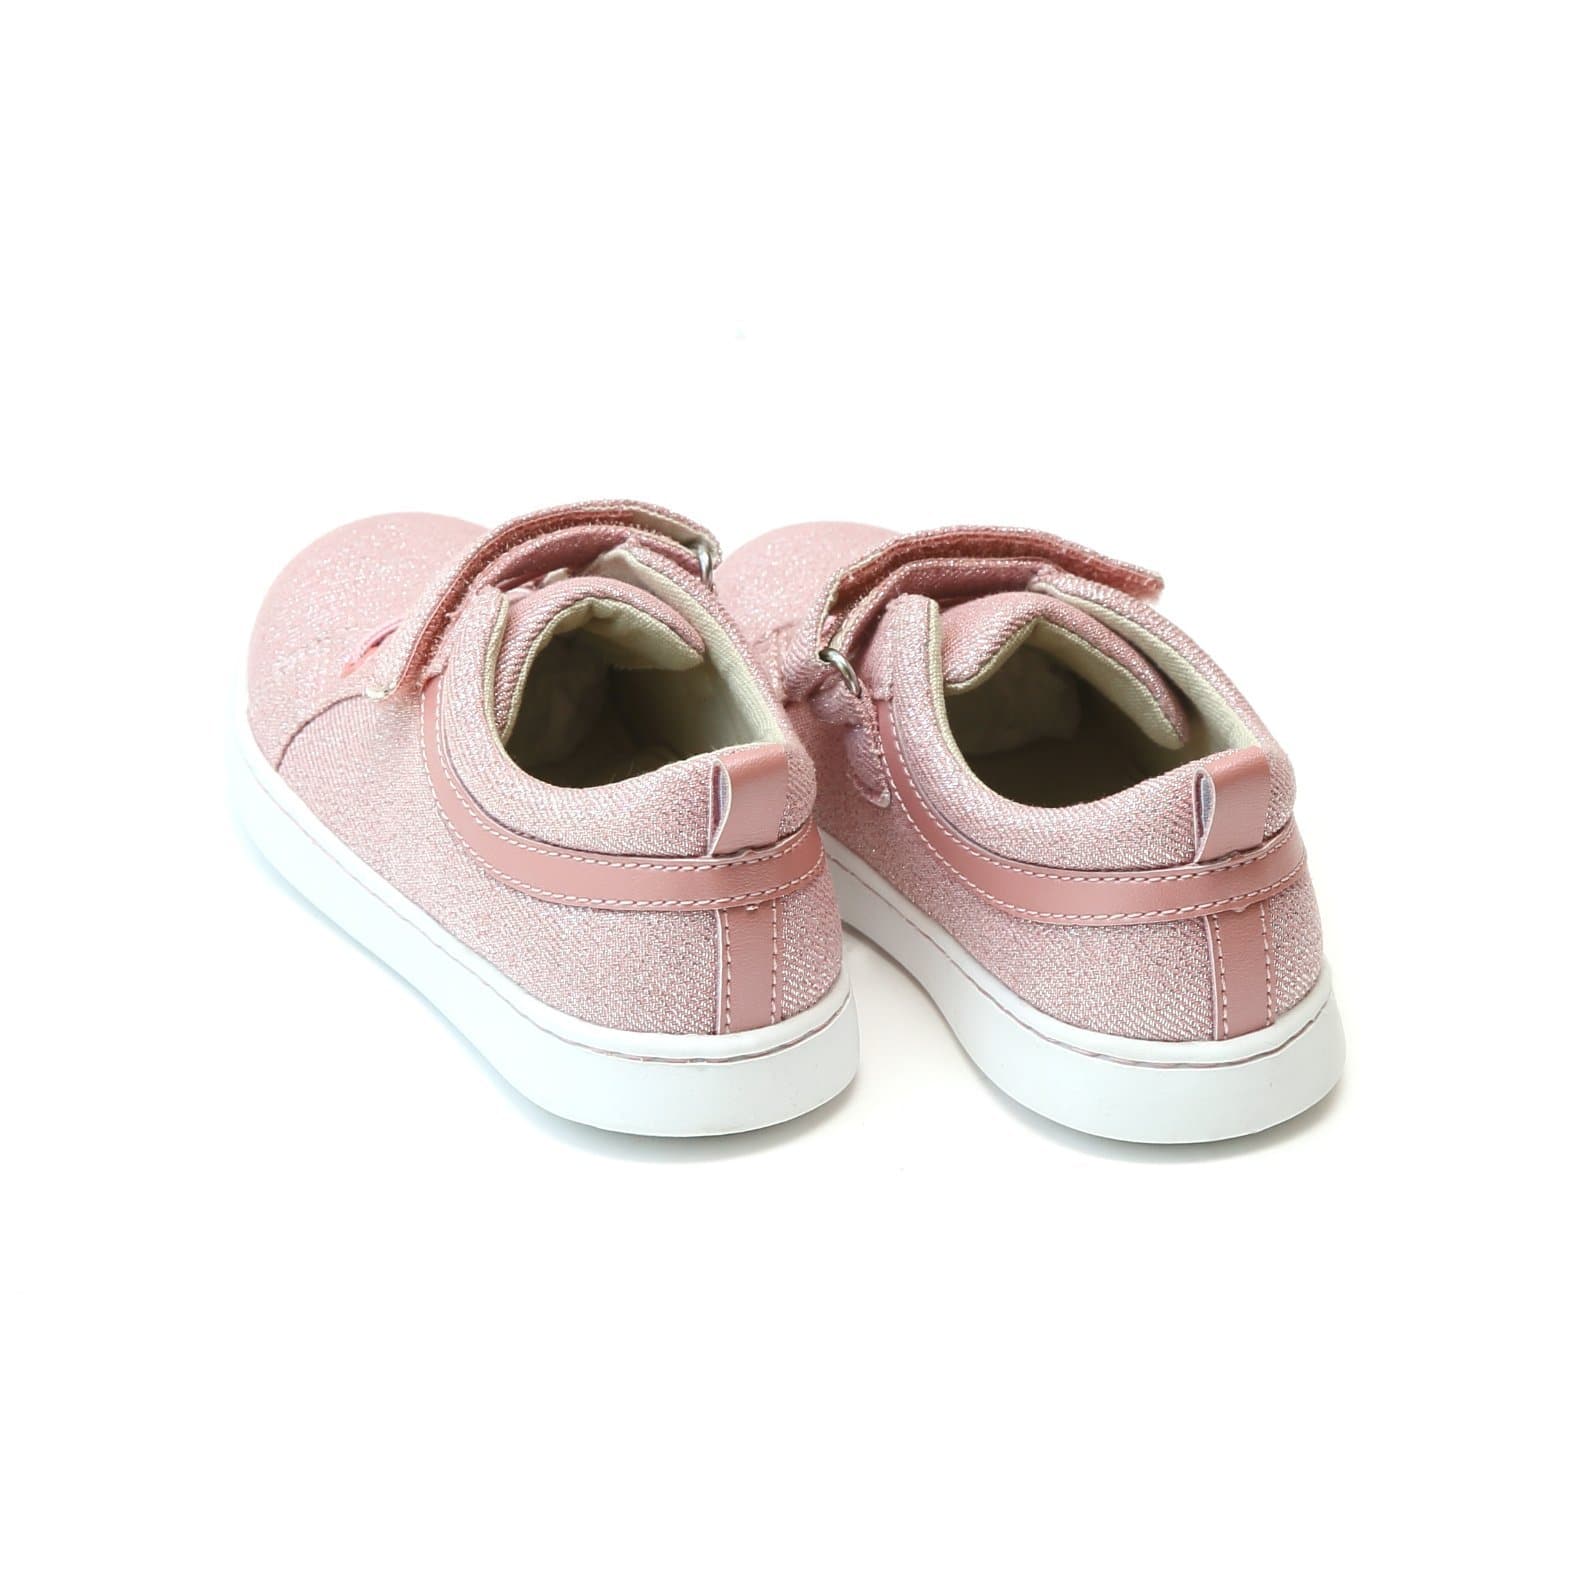 L'amour - L'Amour Baby Girl Natalie Sneaker - Little Miss Muffin Children & Home